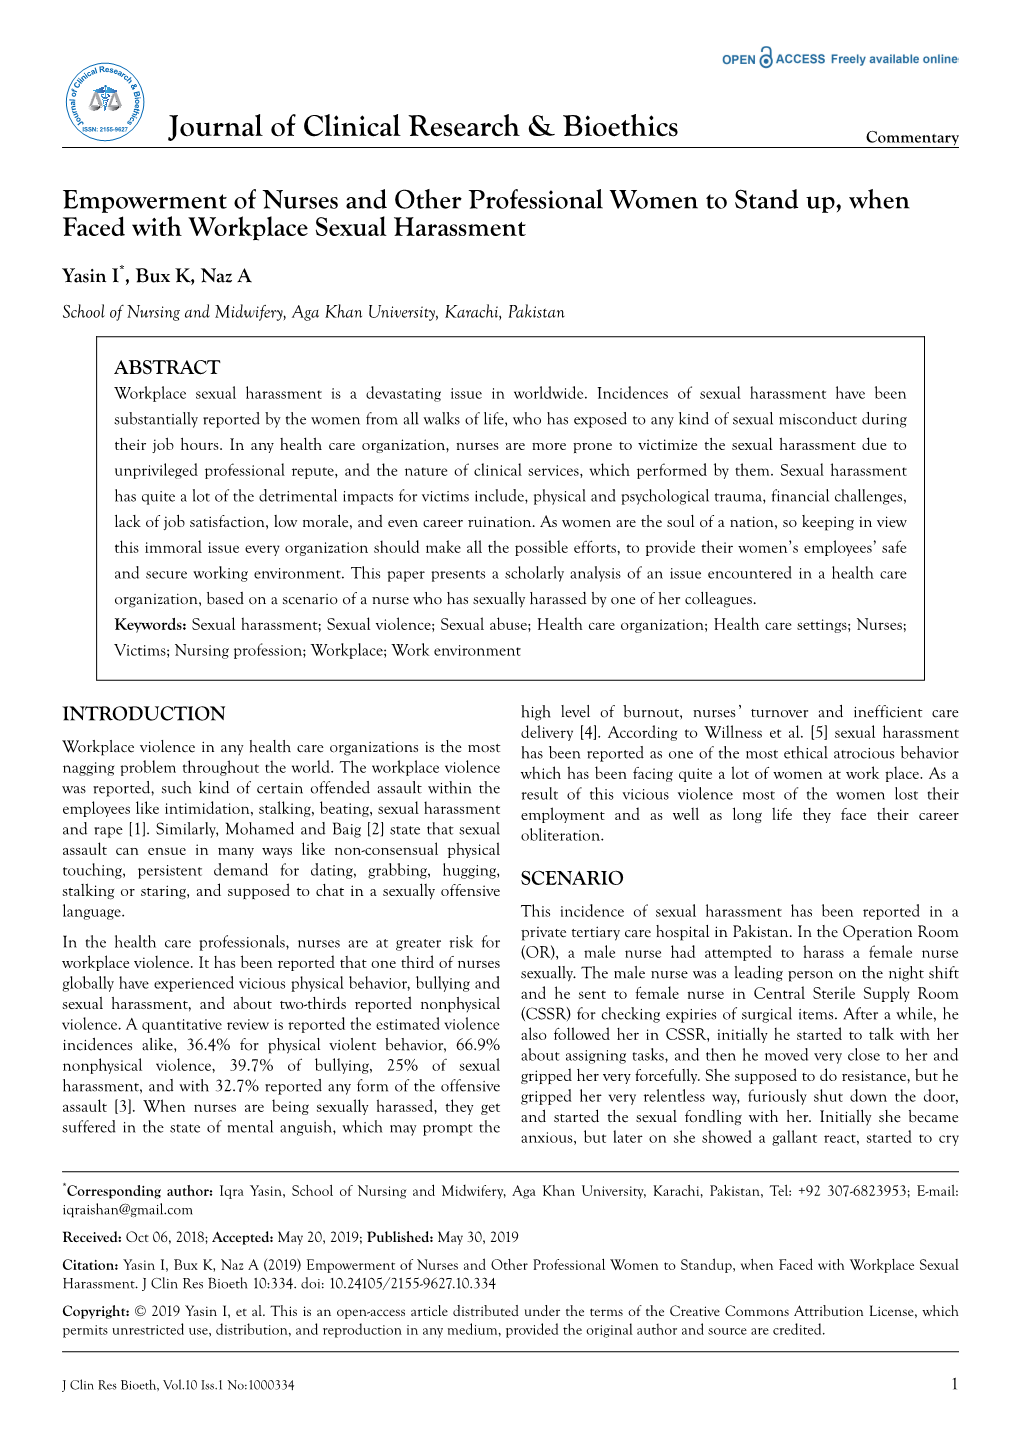 Empowerment of Nurses and Other Professional Women to Stand Up, When Faced with Workplace Sexual Harassment